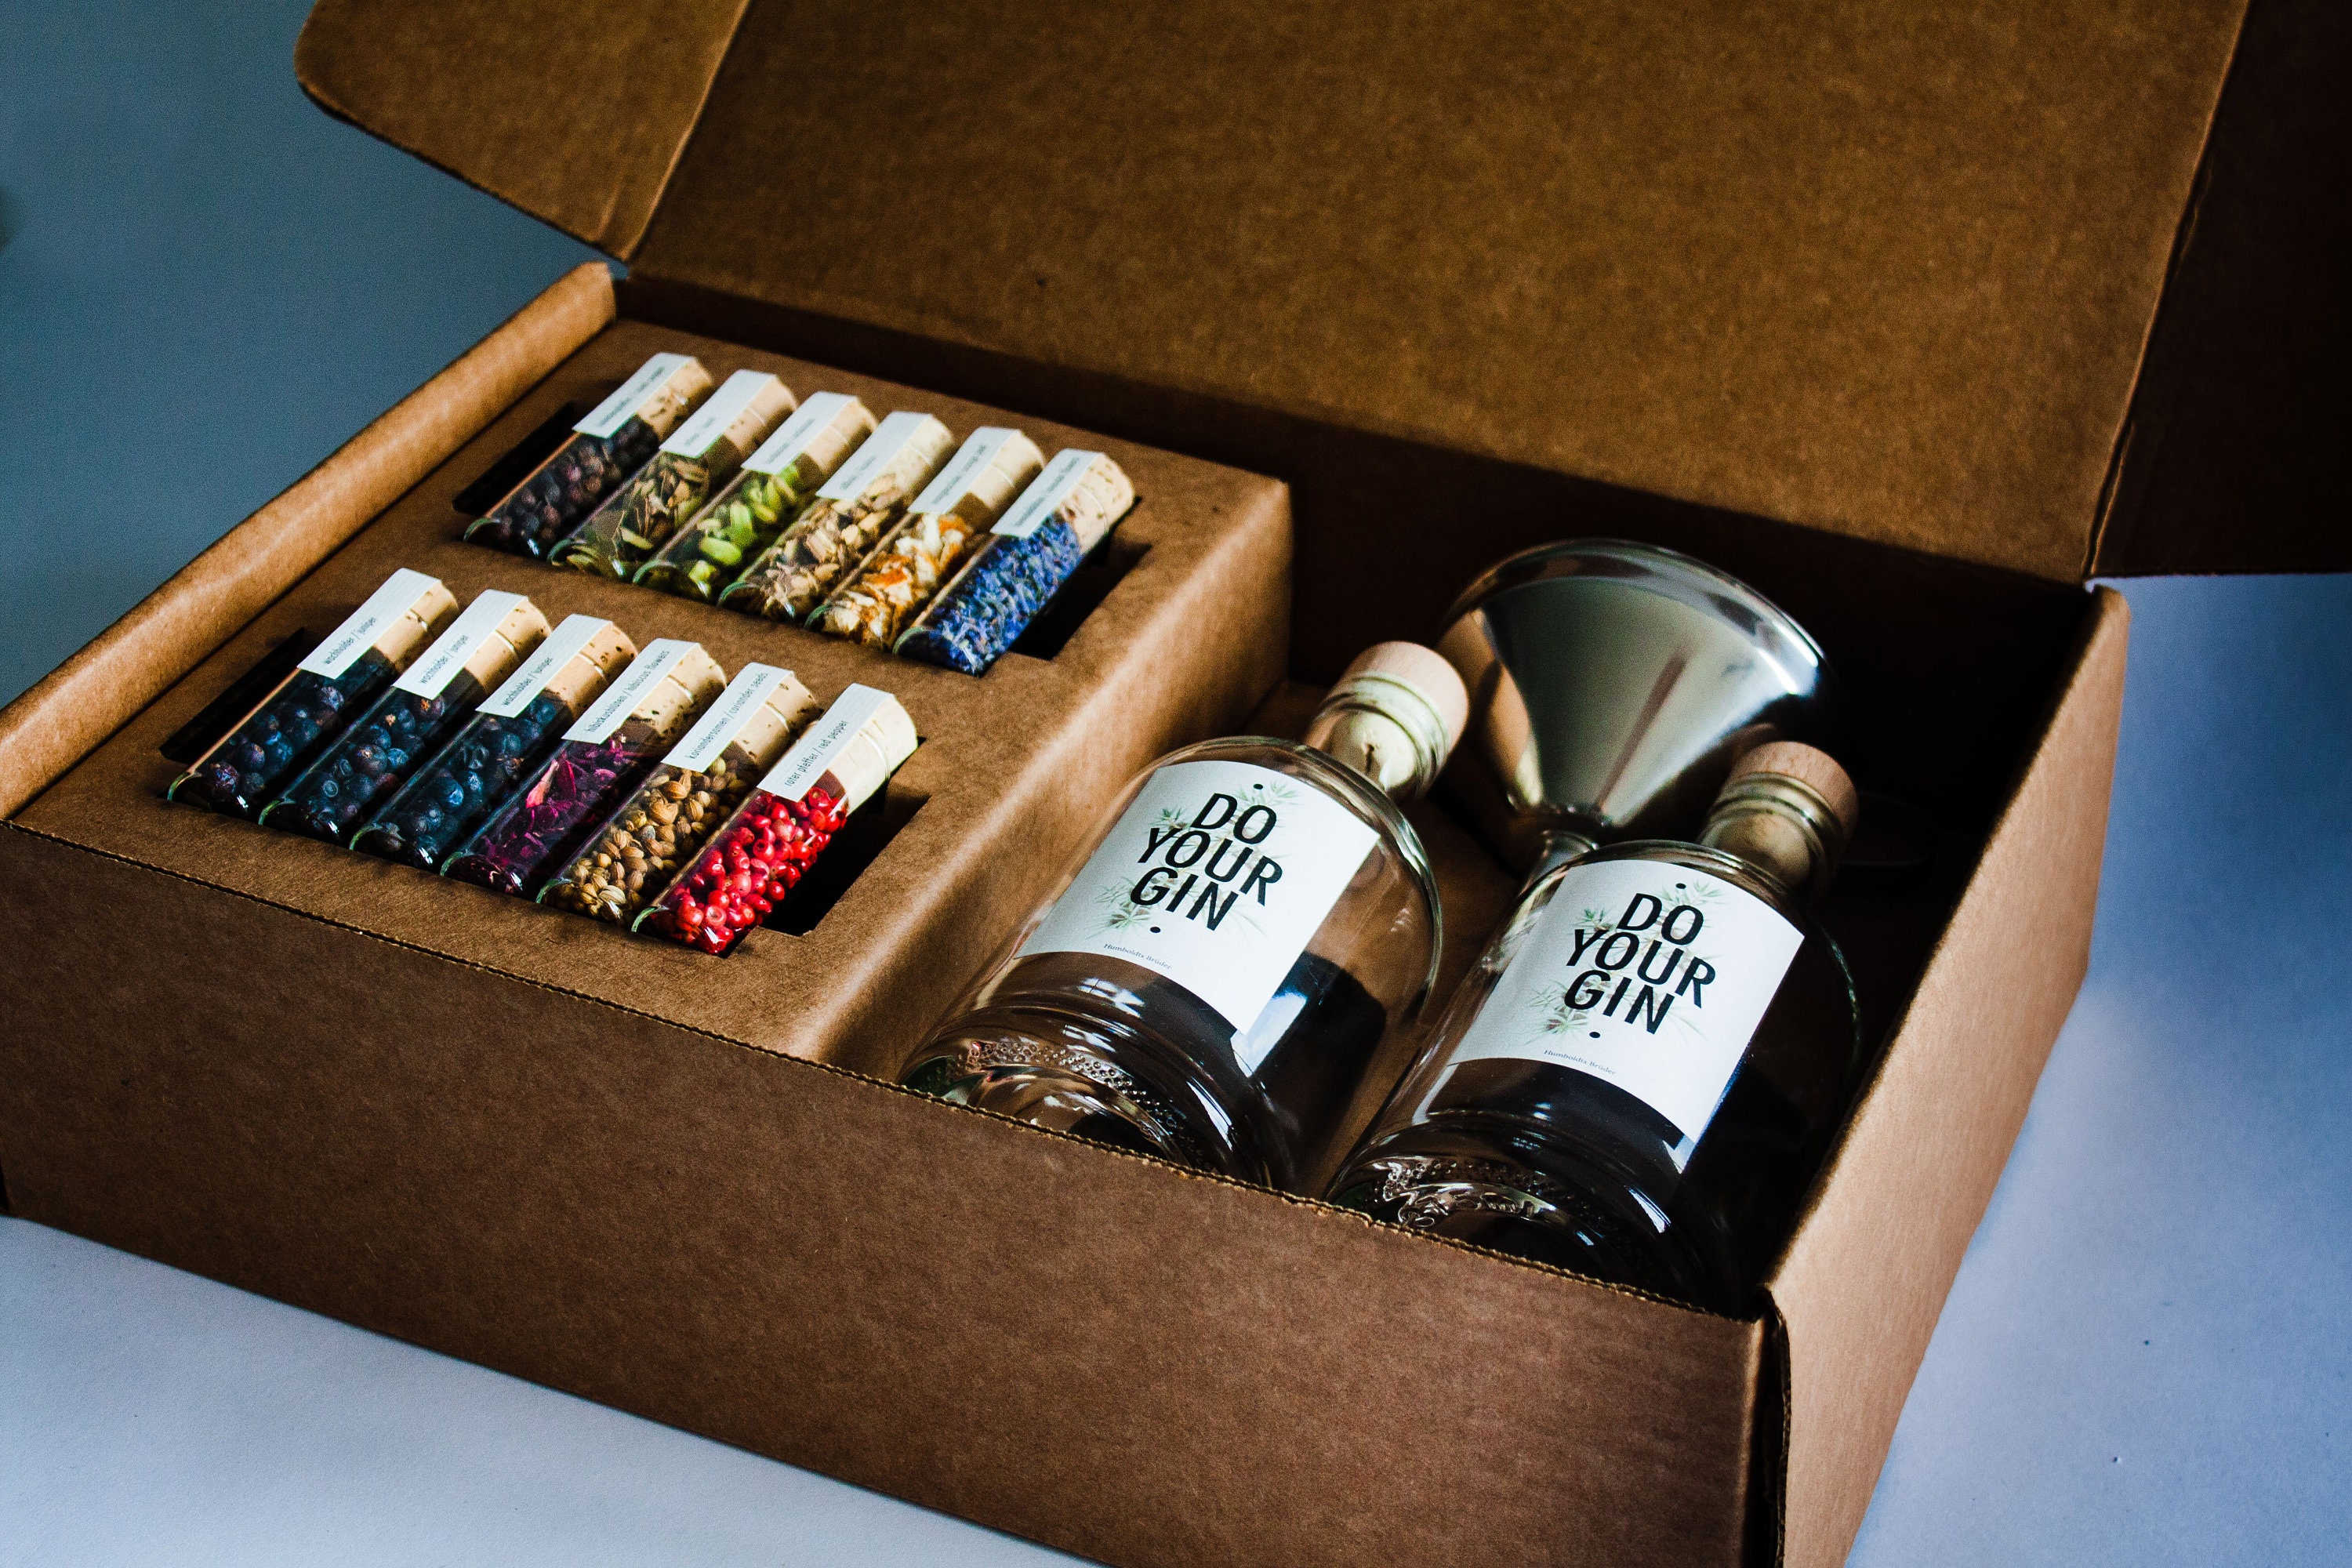 DO YOUR GIN L Diy Gin Making Kit L Father's Day Gift for Him, Boyfriend,  Husband L Birthday Gift for Men & Women L Homemade Cocktails Kit 